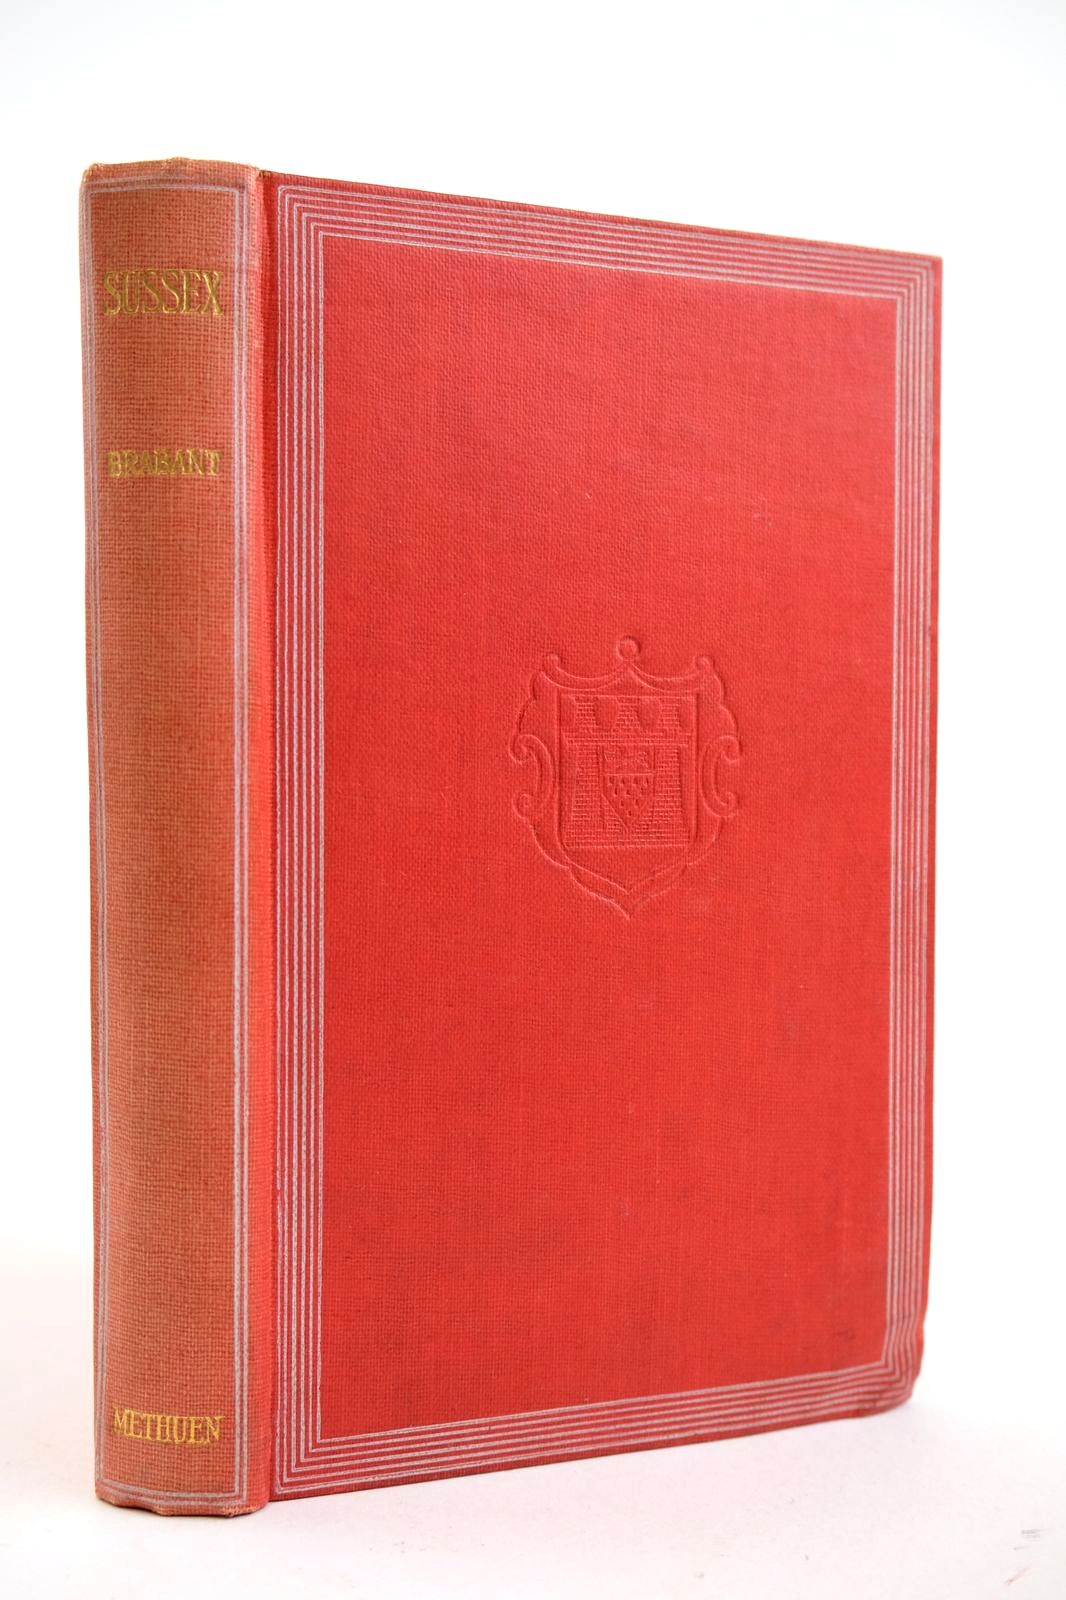 Photo of SUSSEX (LITTLE GUIDE) written by Brabant, F.G. published by Methuen & Co. Ltd. (STOCK CODE: 2132604)  for sale by Stella & Rose's Books